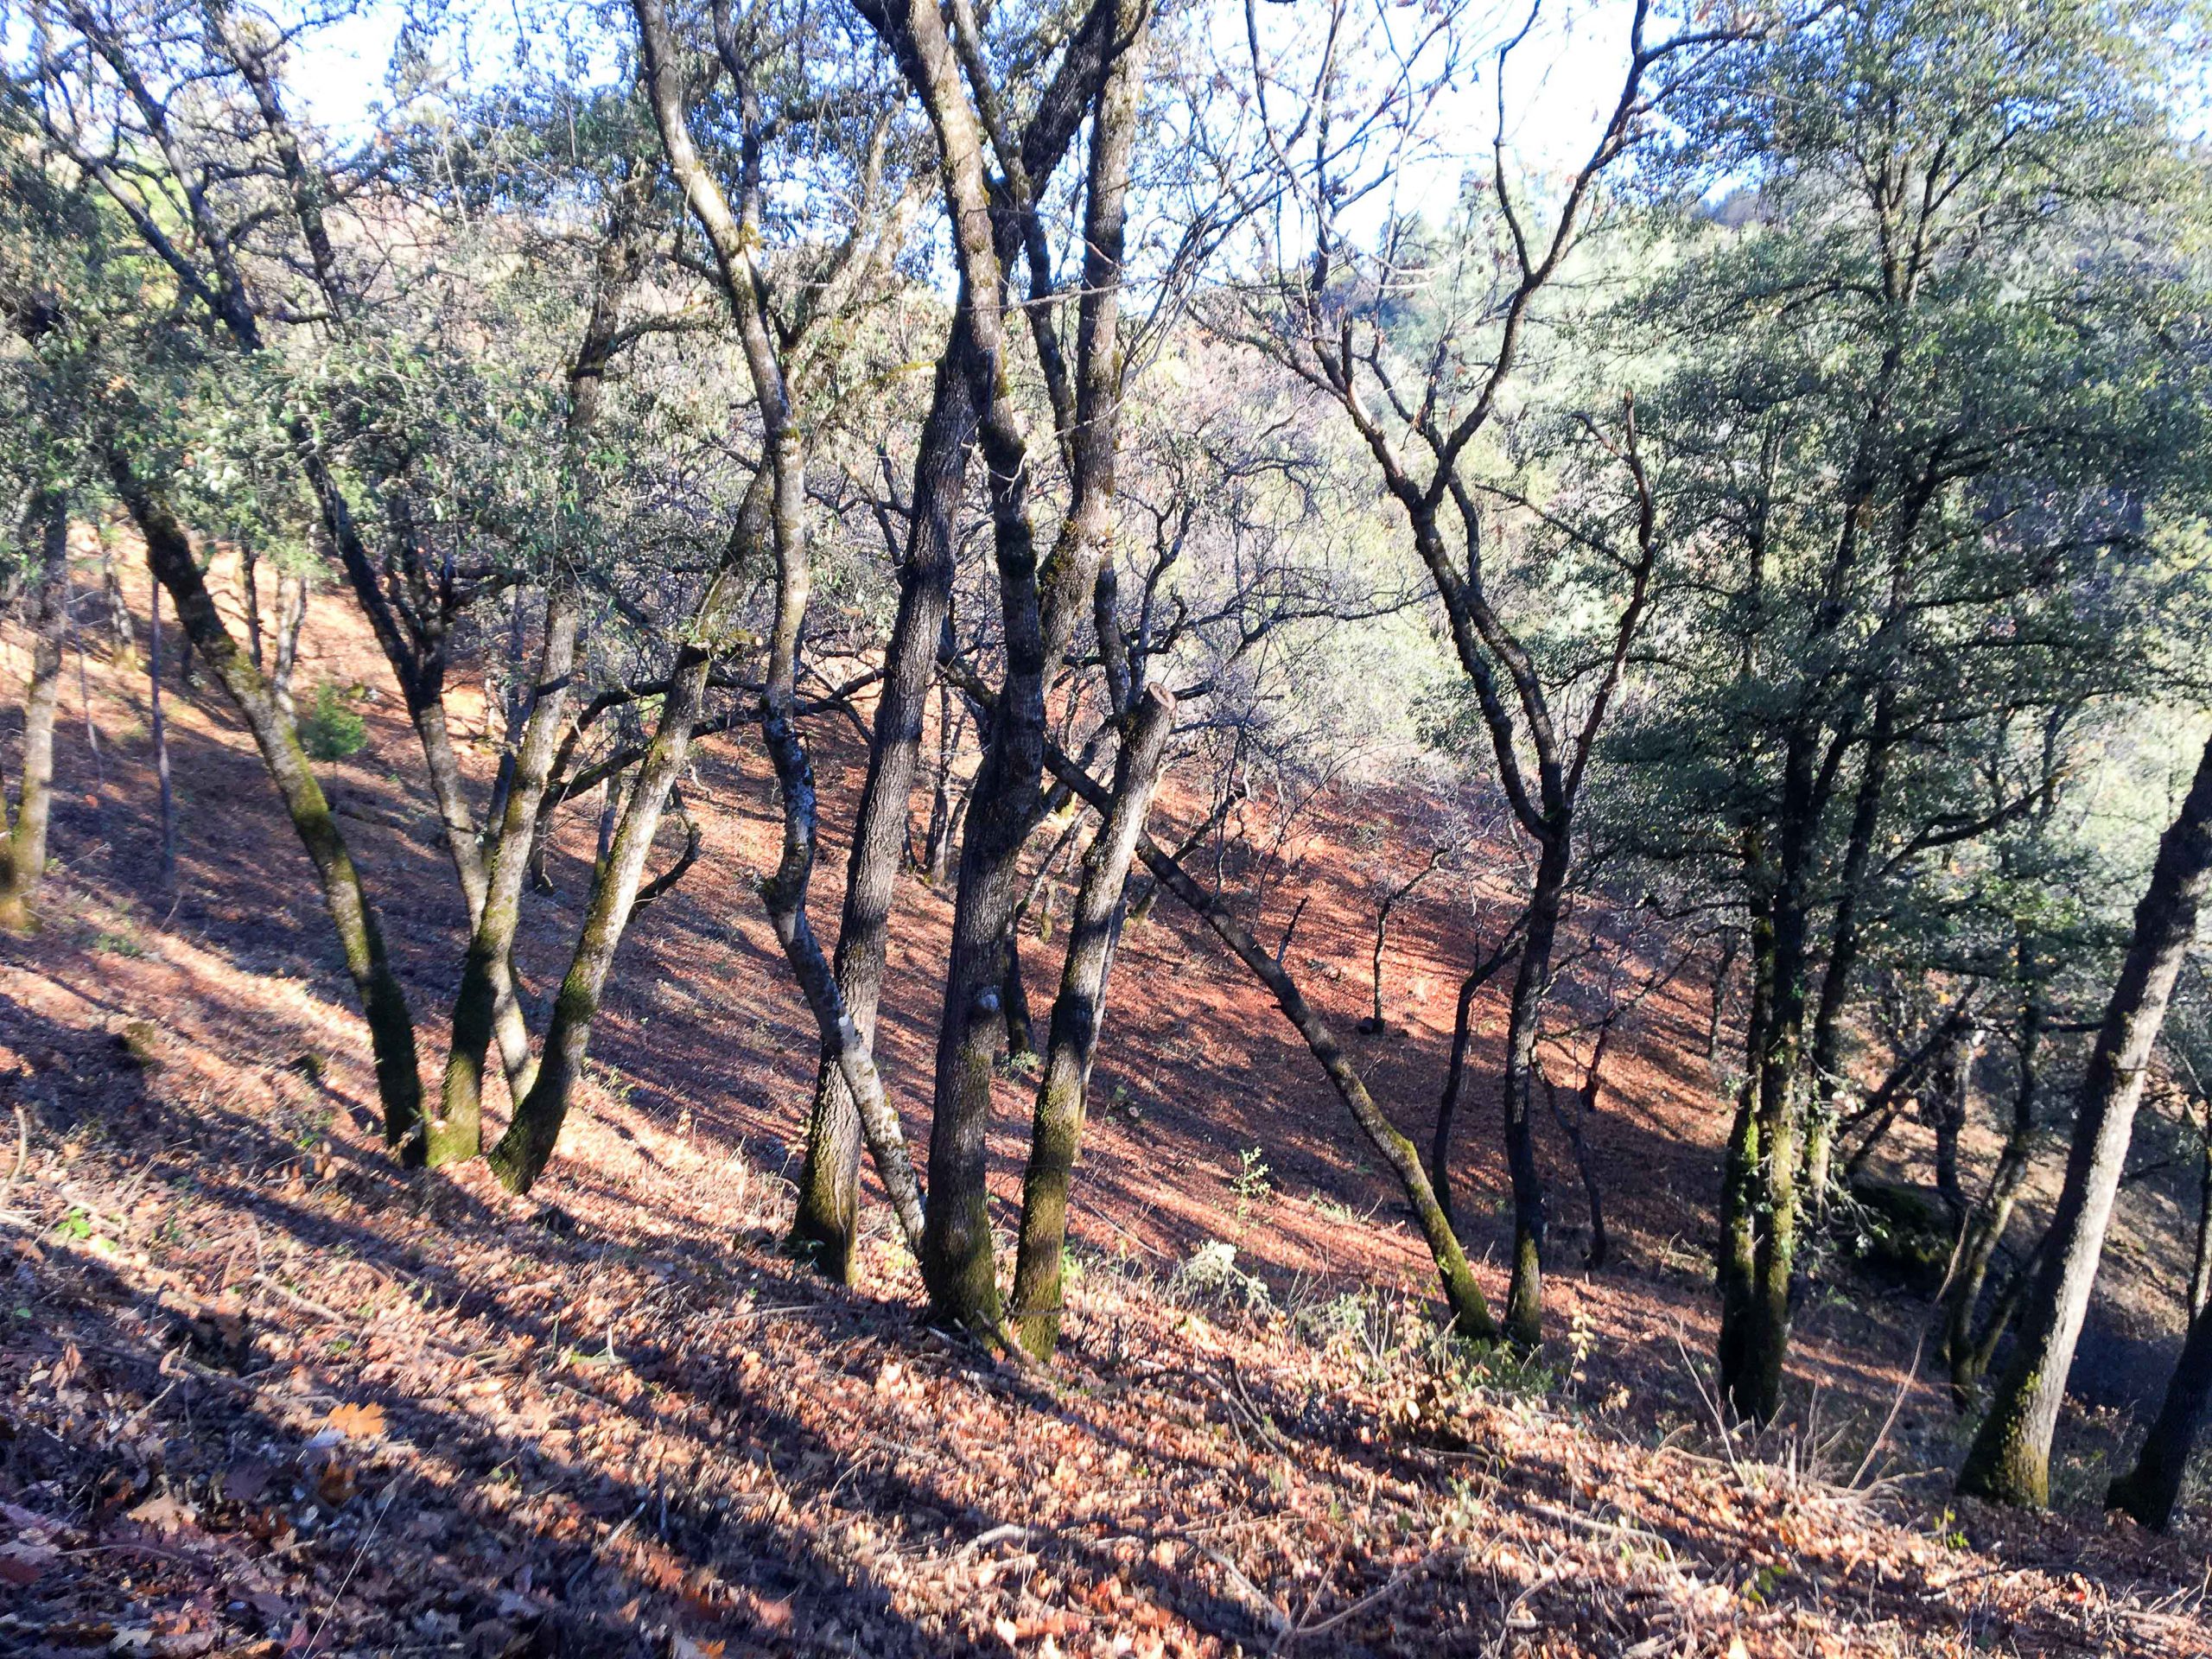 A forested area with a clear understory.